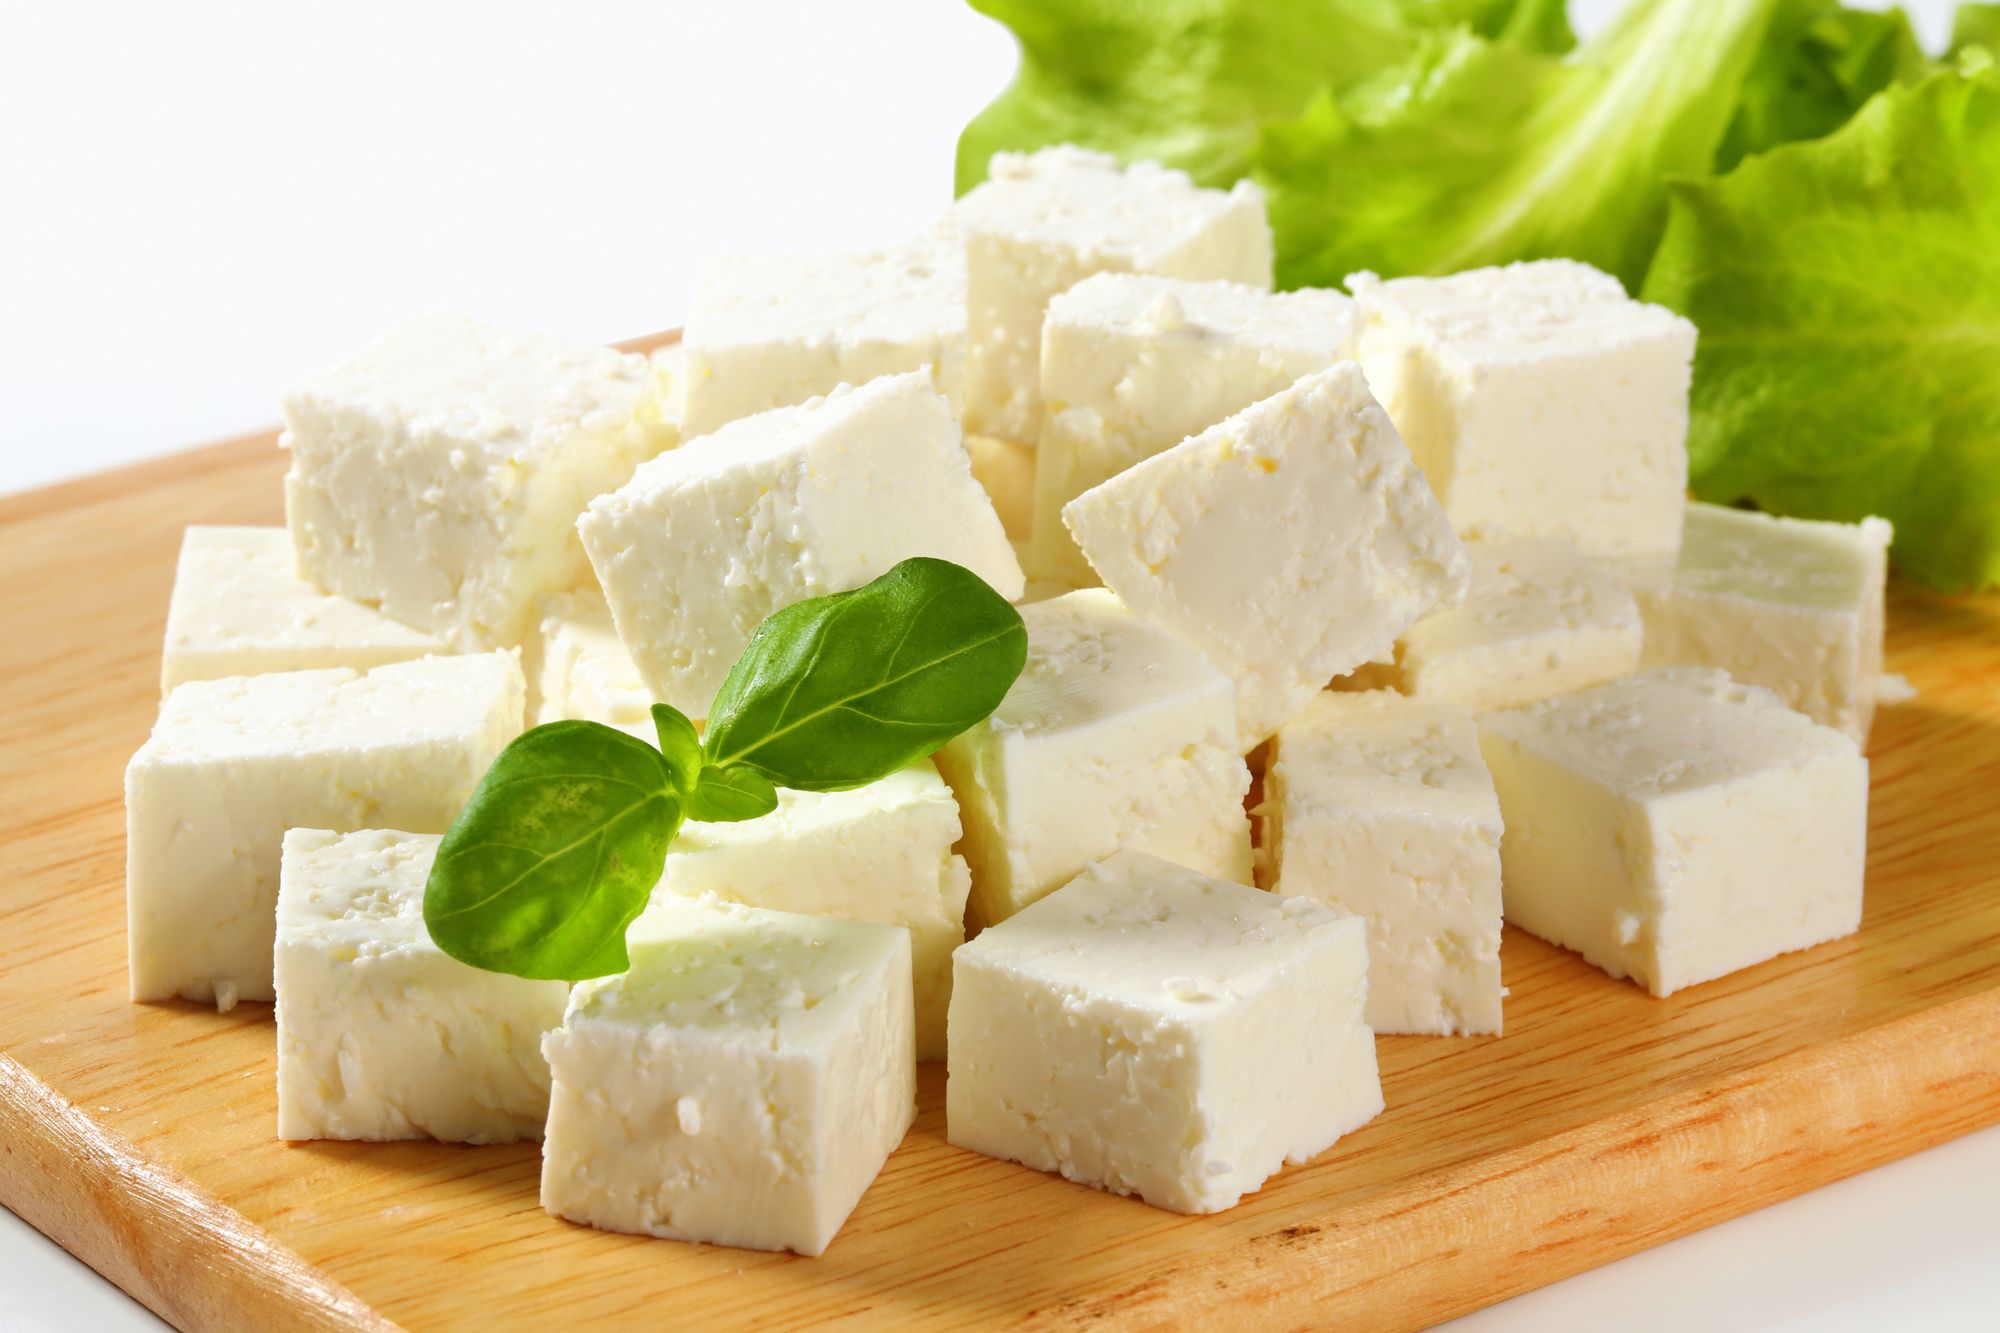 Feta Cheese cubes on cutting board regarding Glooscap lawsuit over cheese deal gone sour